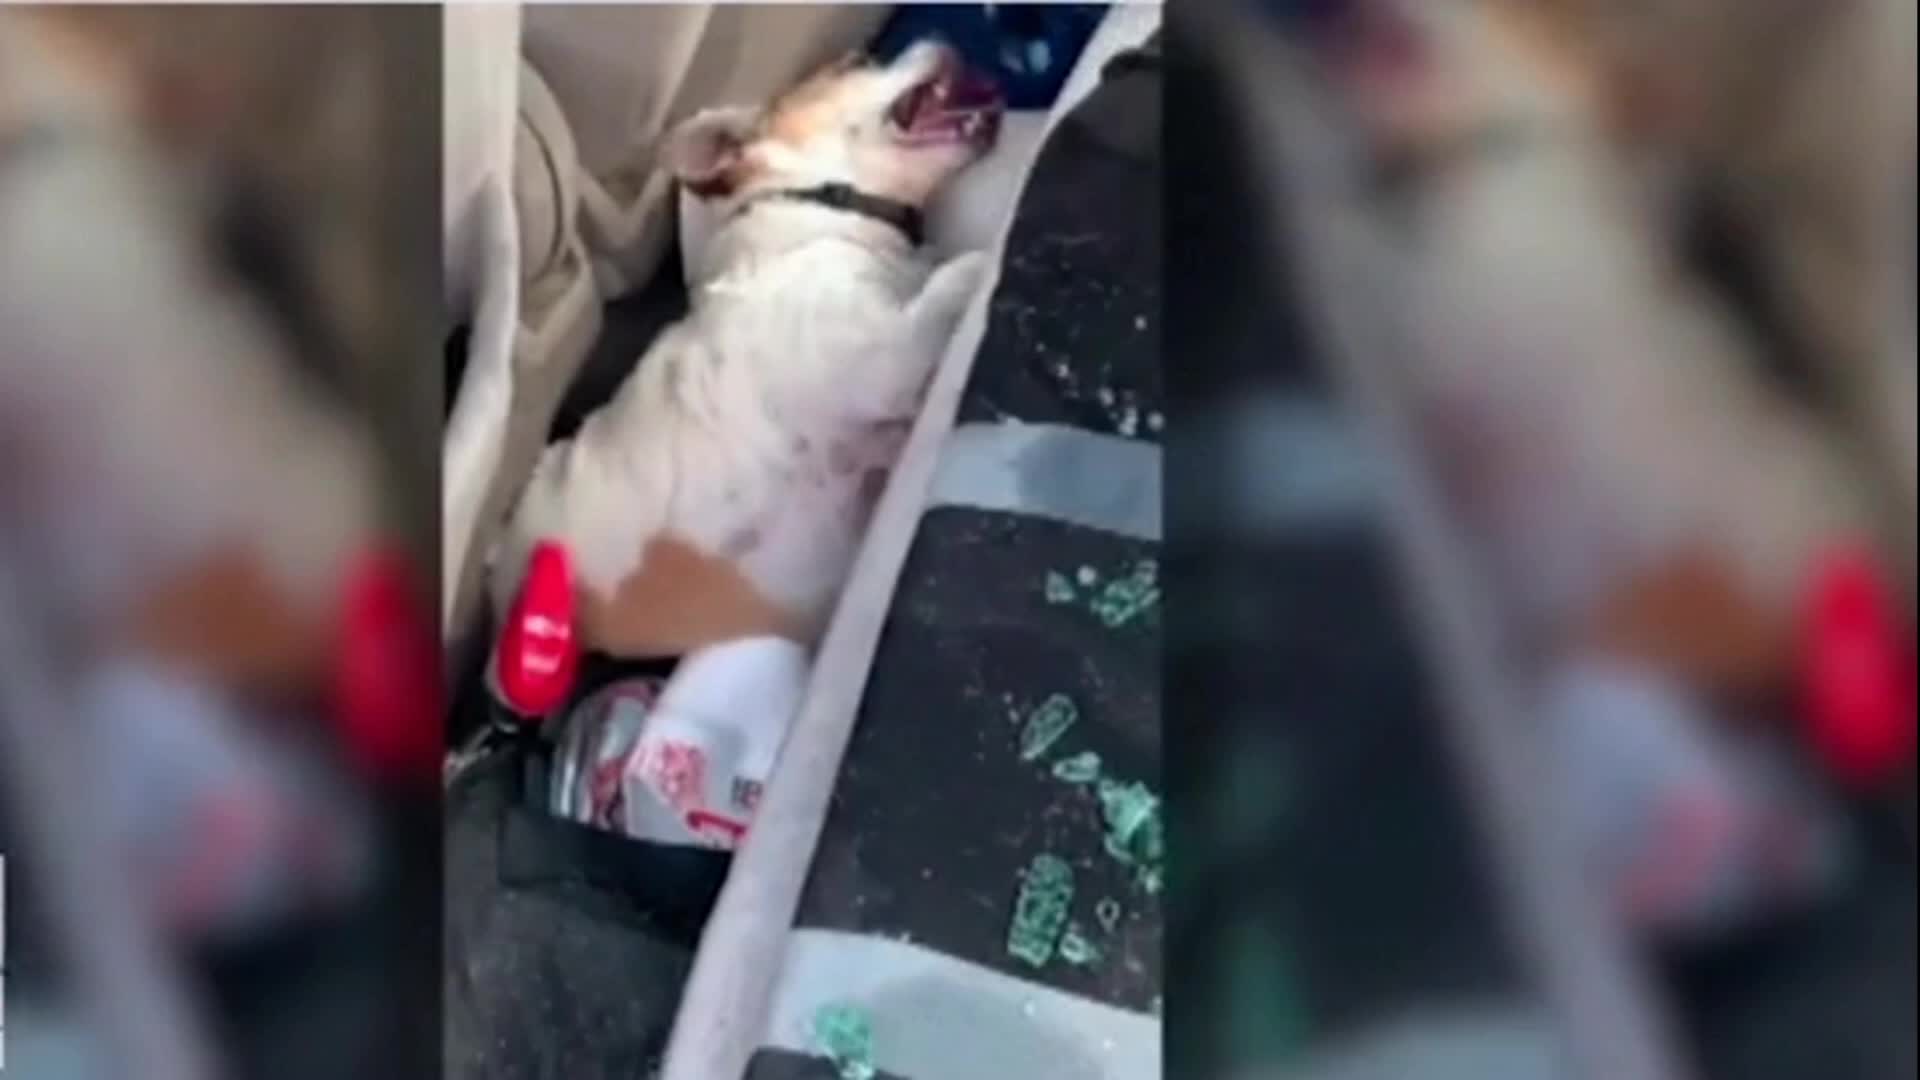 A puppy in the United States was left in a 50-degree car by its owner with suspected brain damage